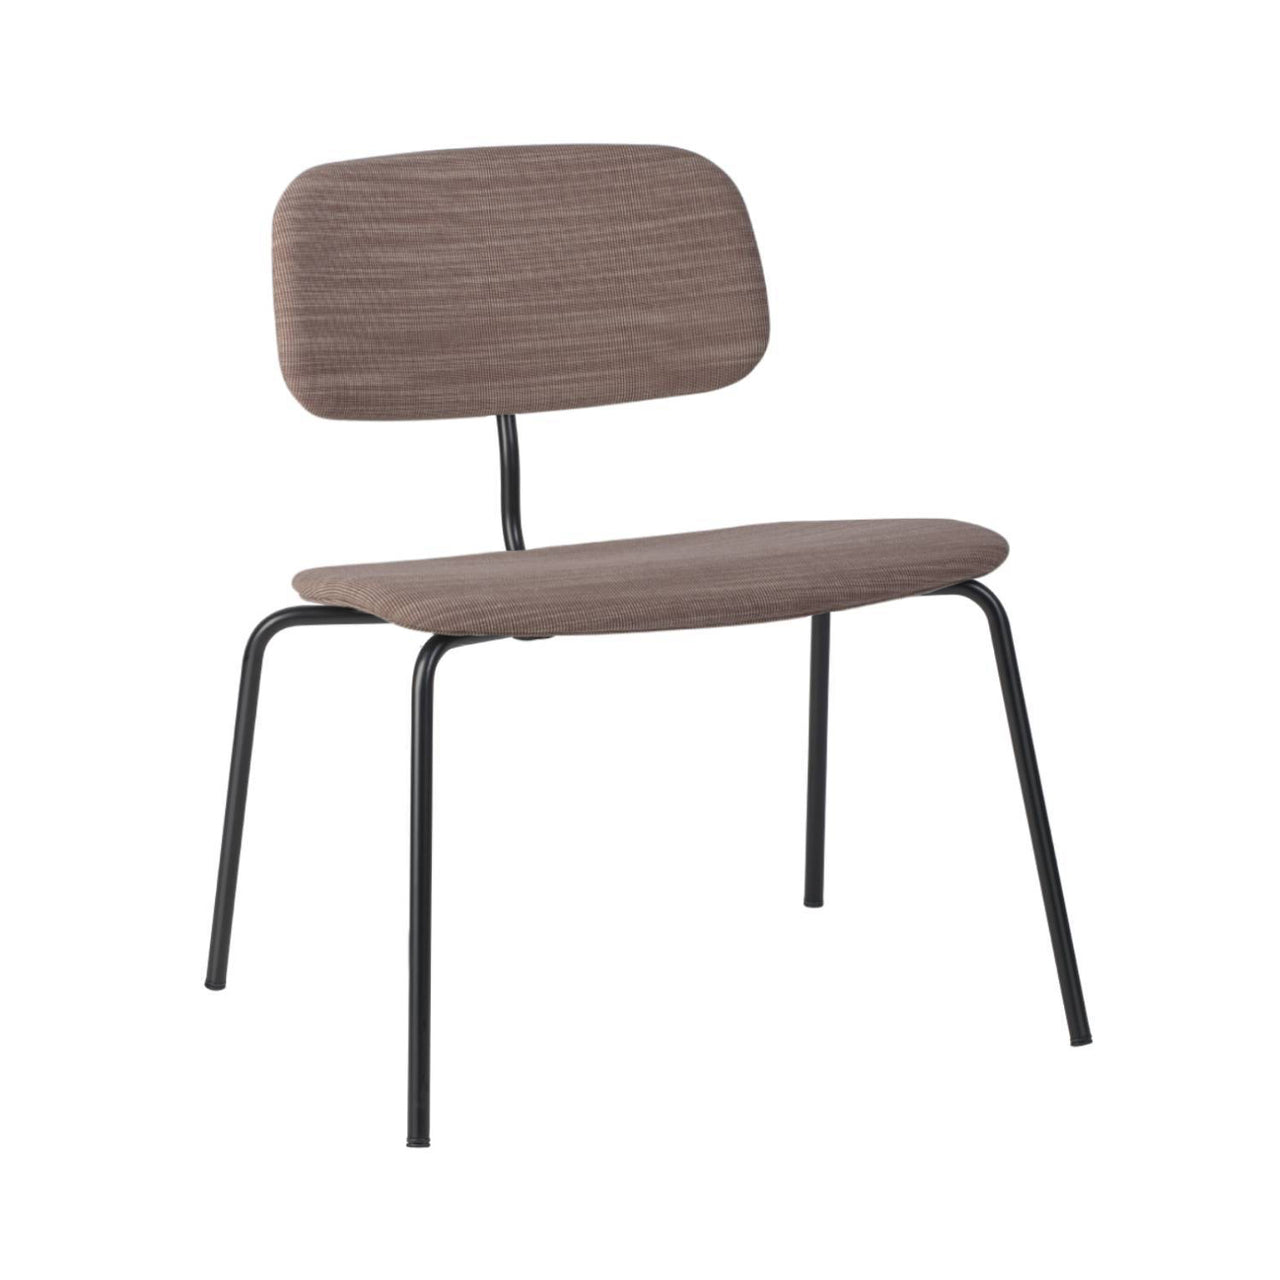 Kevi 2063 Lounge Chair: Fully Upholstered + Powder Coated Black